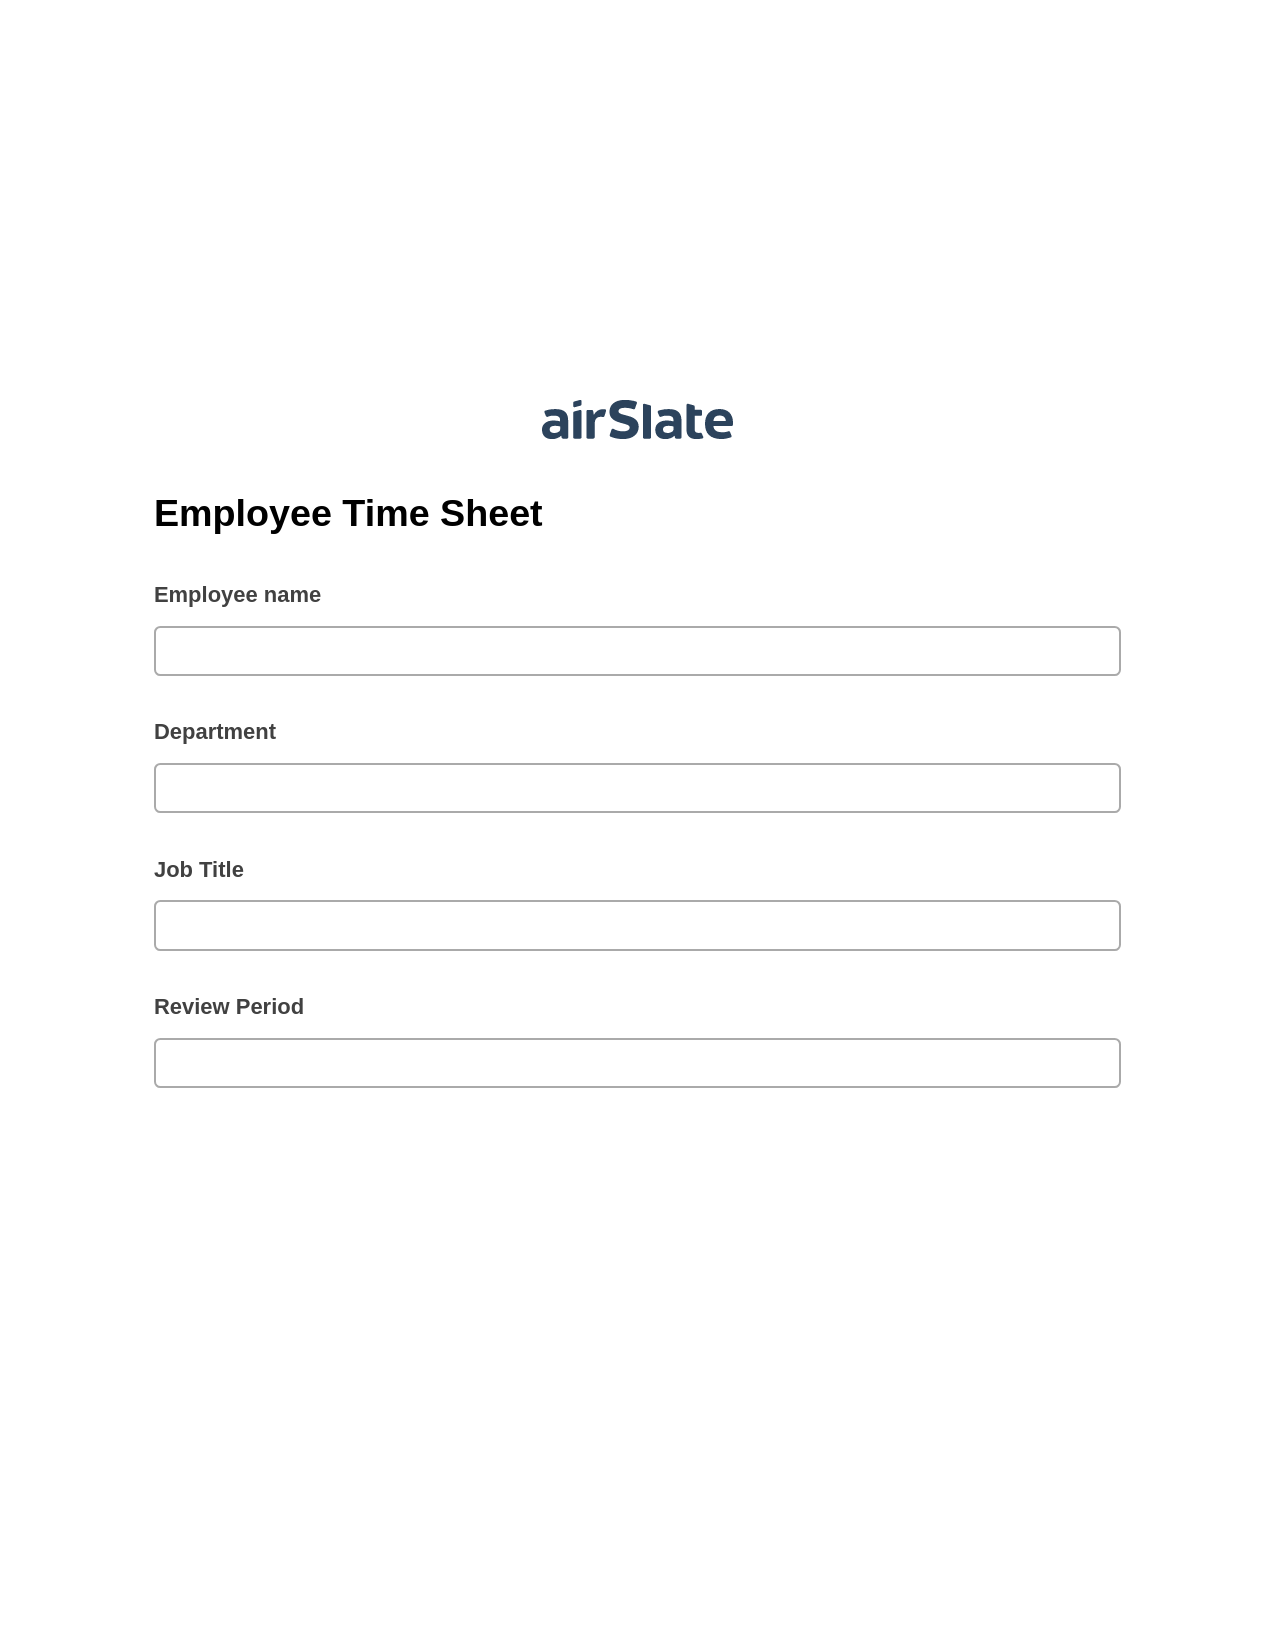 Employee Time Sheet Pre-fill from MS Dynamics 365 Records, Update Audit Trail Bot, Export to WebMerge Bot